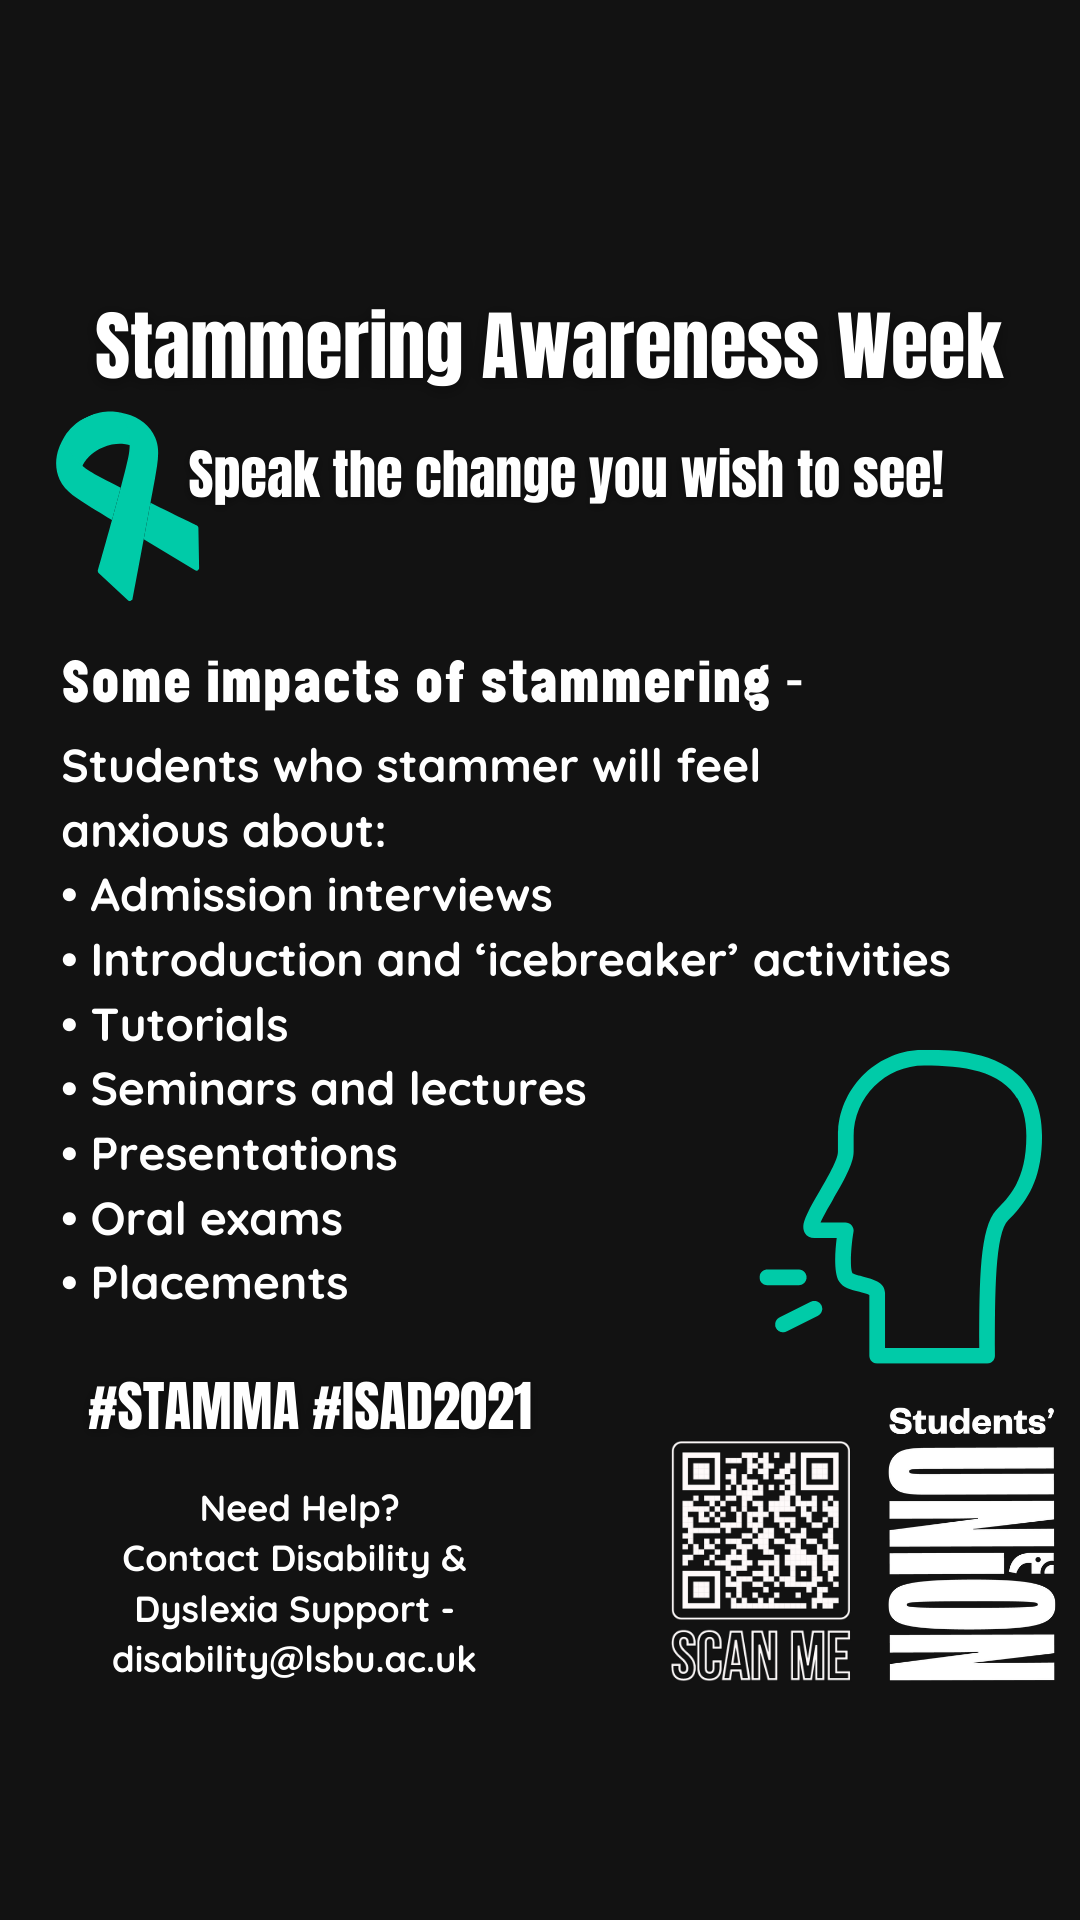 Impacts of Stammering poster: Students who stammer will feel anxious about: Admission interviews. Introduction and ‘icebreaker’ activities. Tutorials. Seminars and lectures. Presentations. Oral exams. Placements